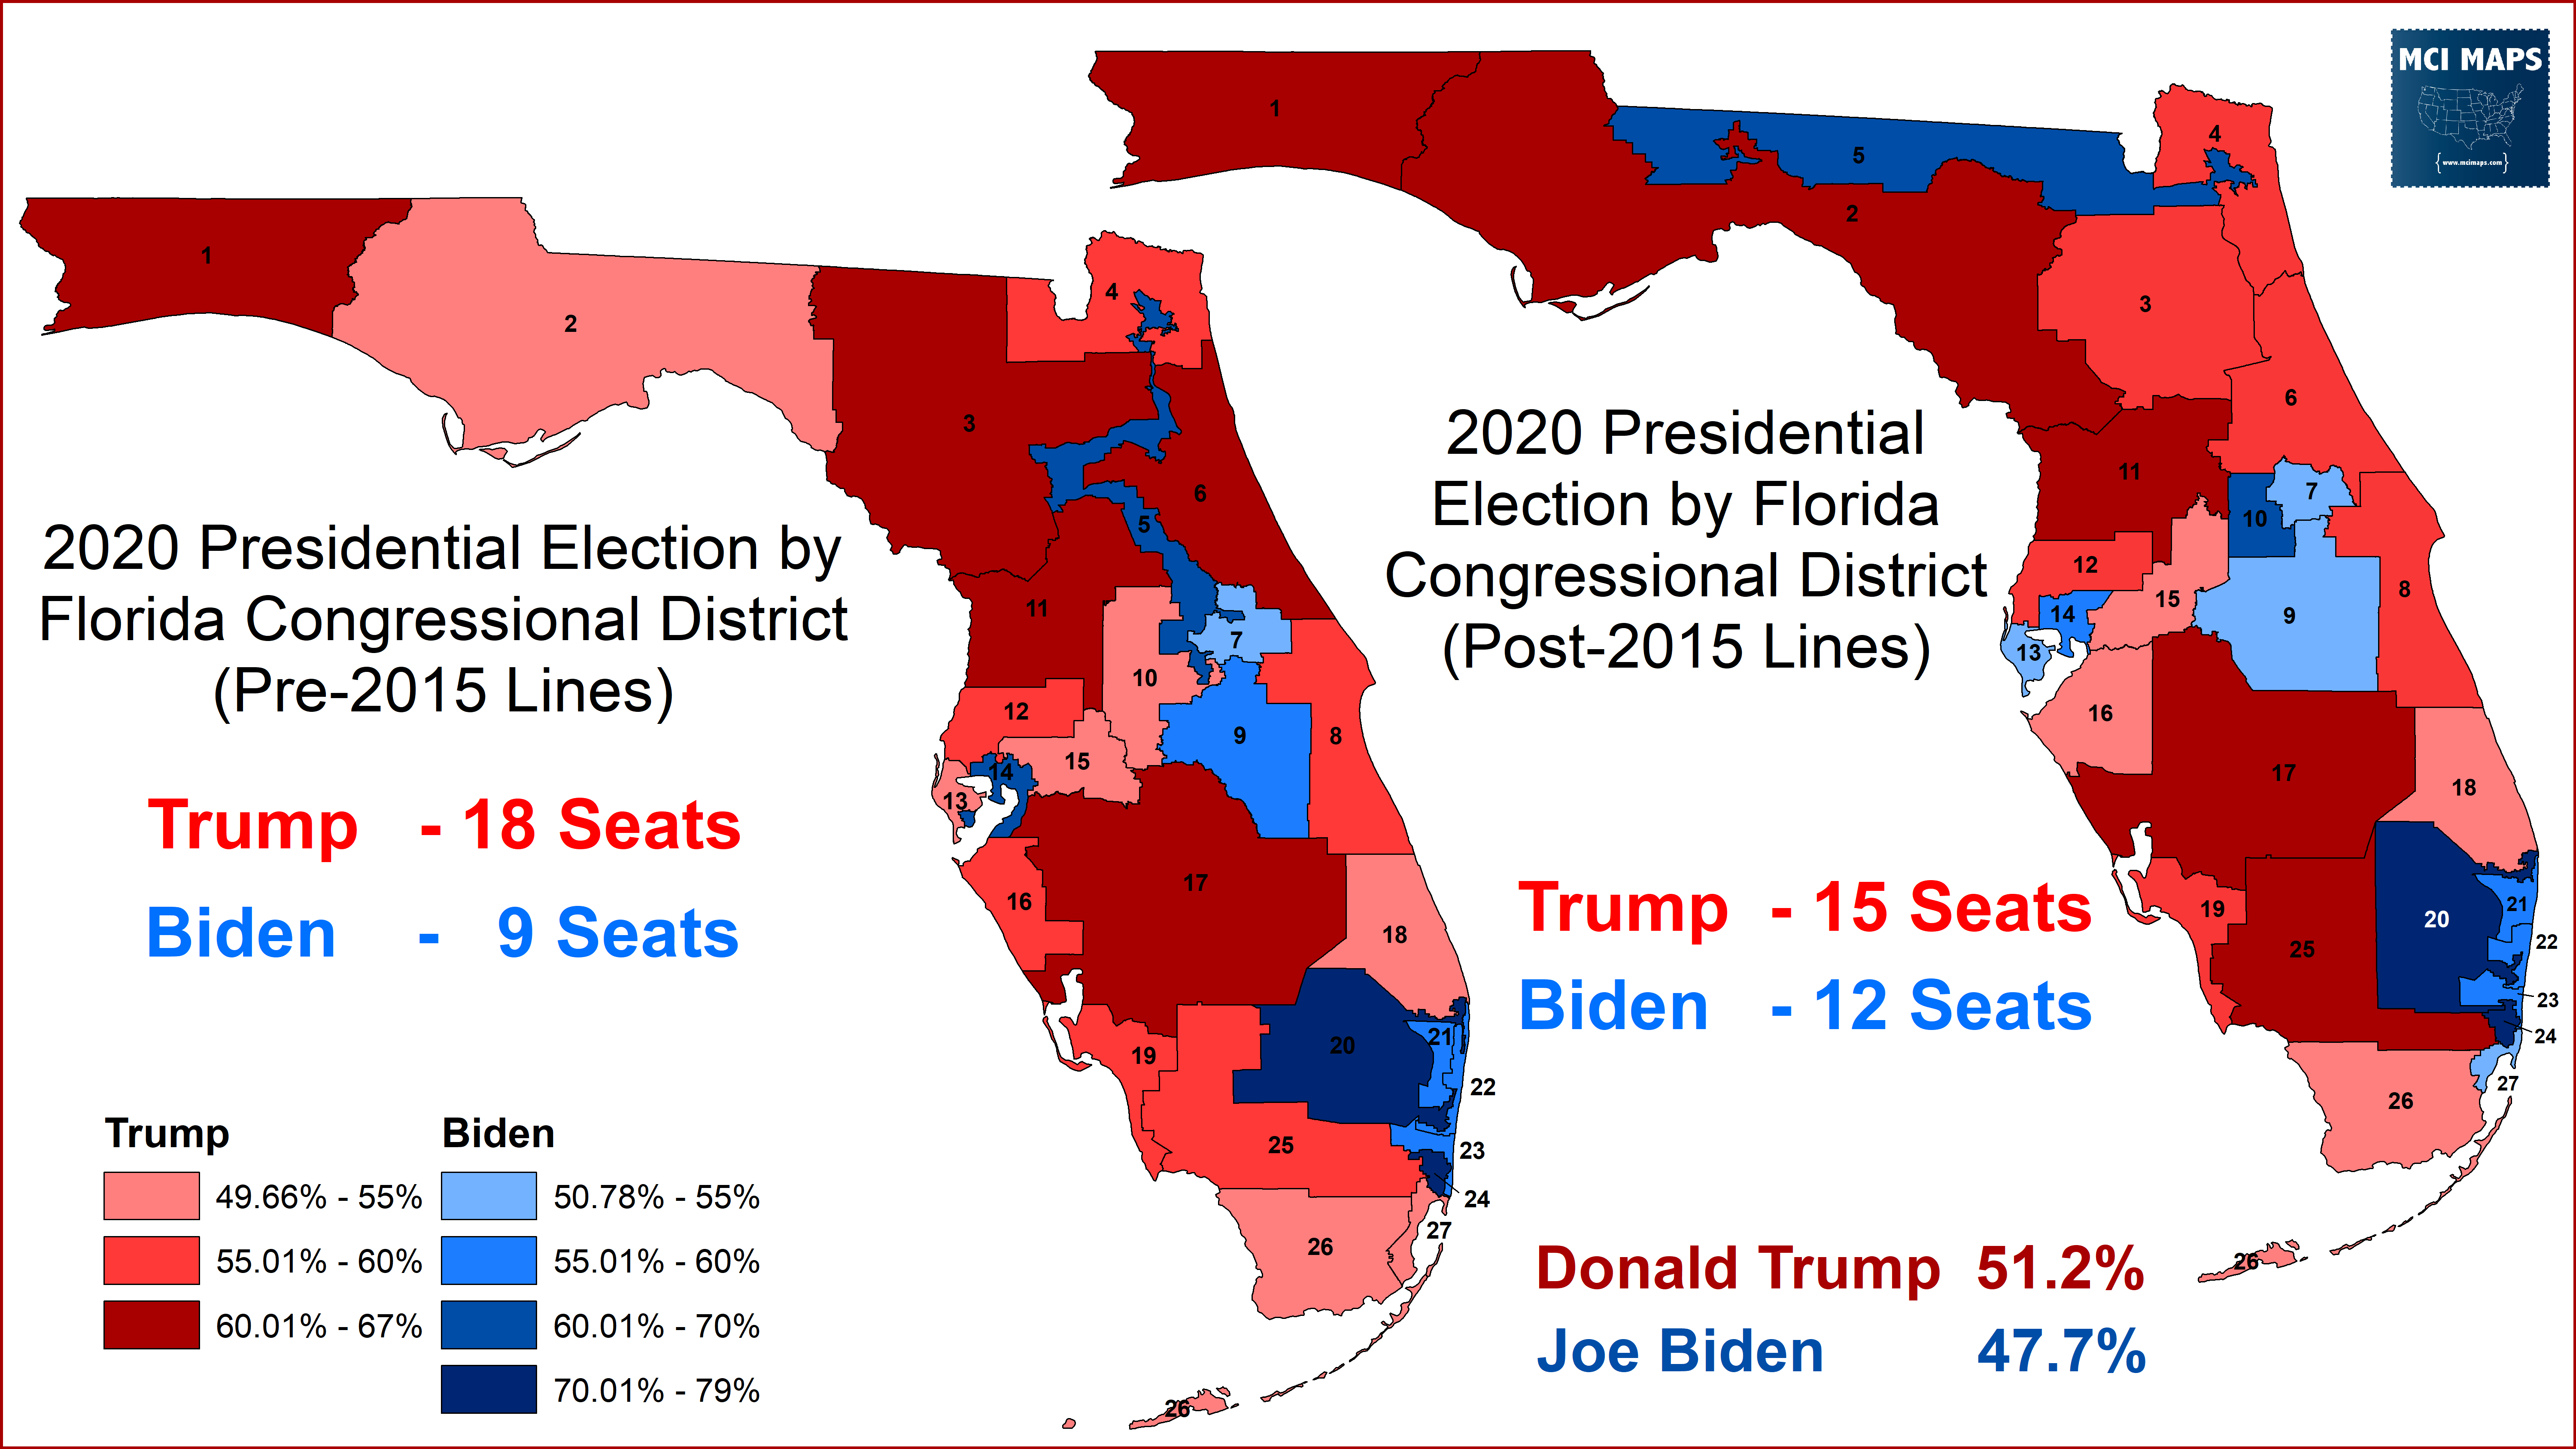 How Florida’s Congressional Districts Voted in the 2020 Presidential